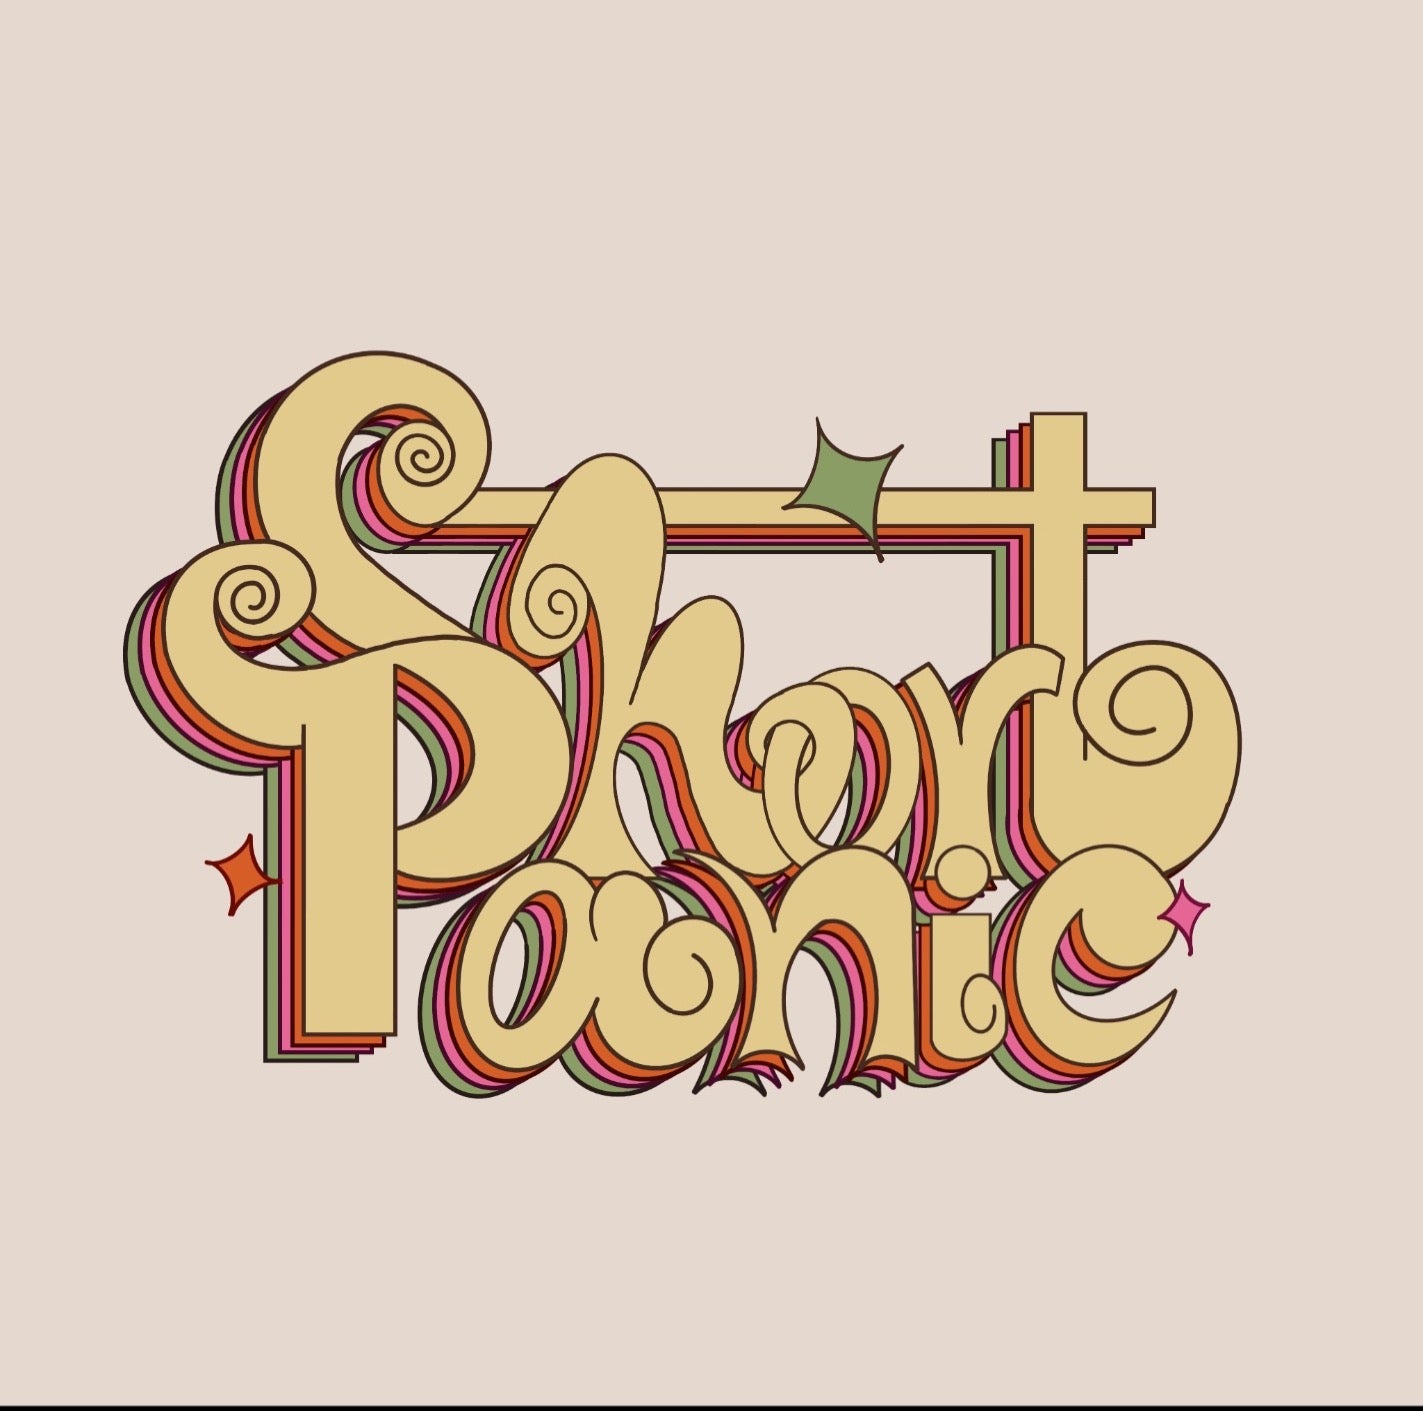 NEW RELEASE: Short Panic - Self Titled CD